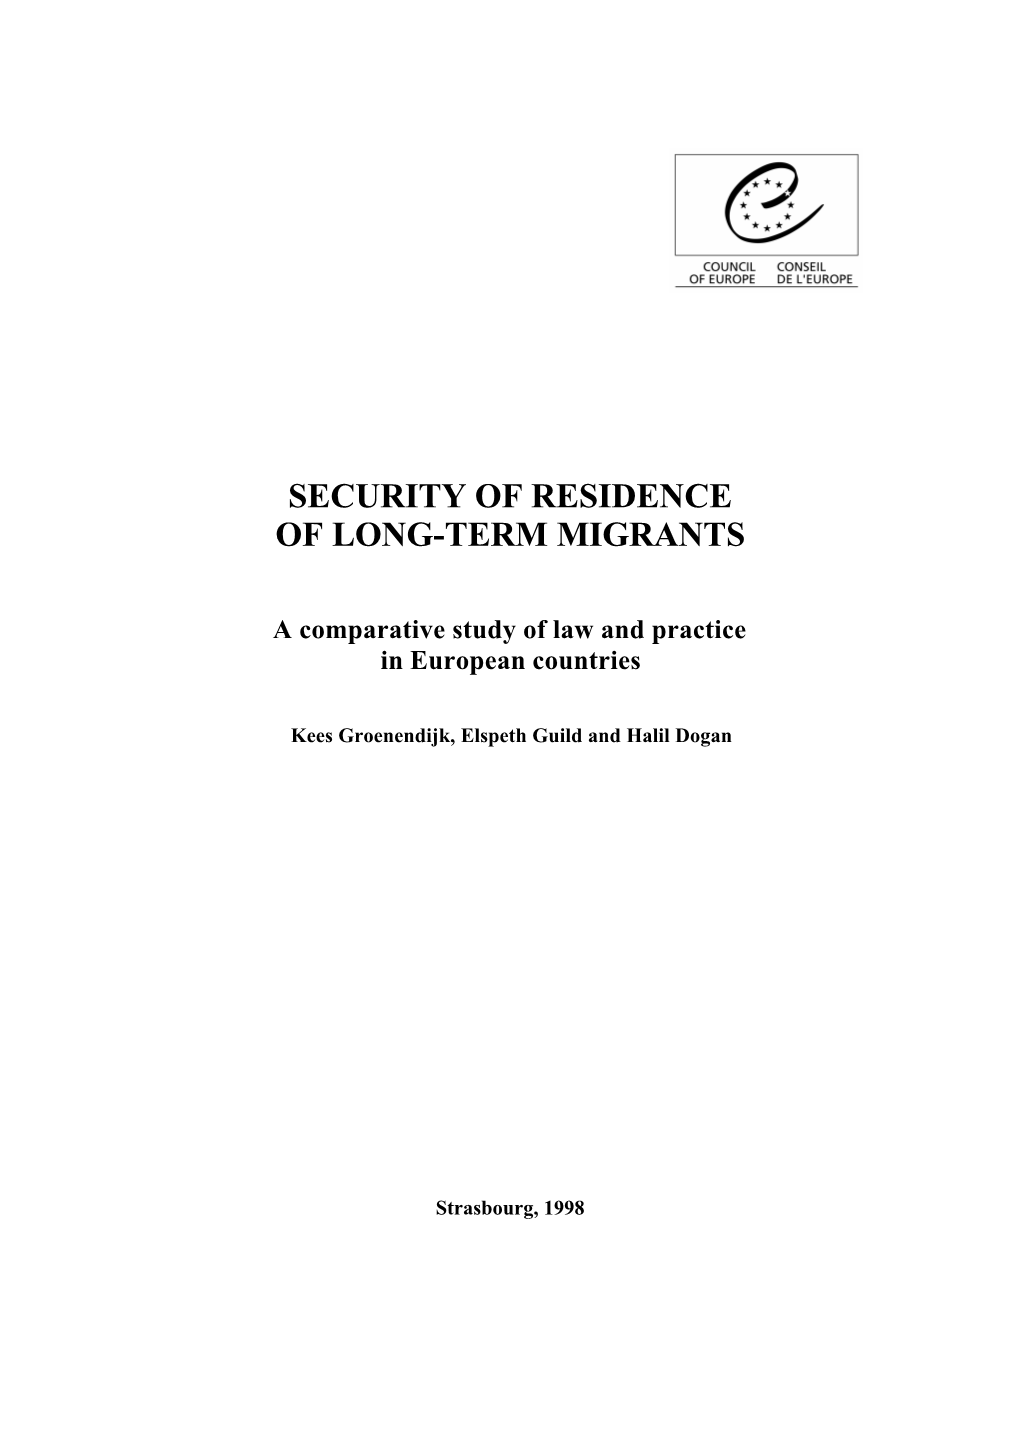 Security of Residence of Long-Term Migrants